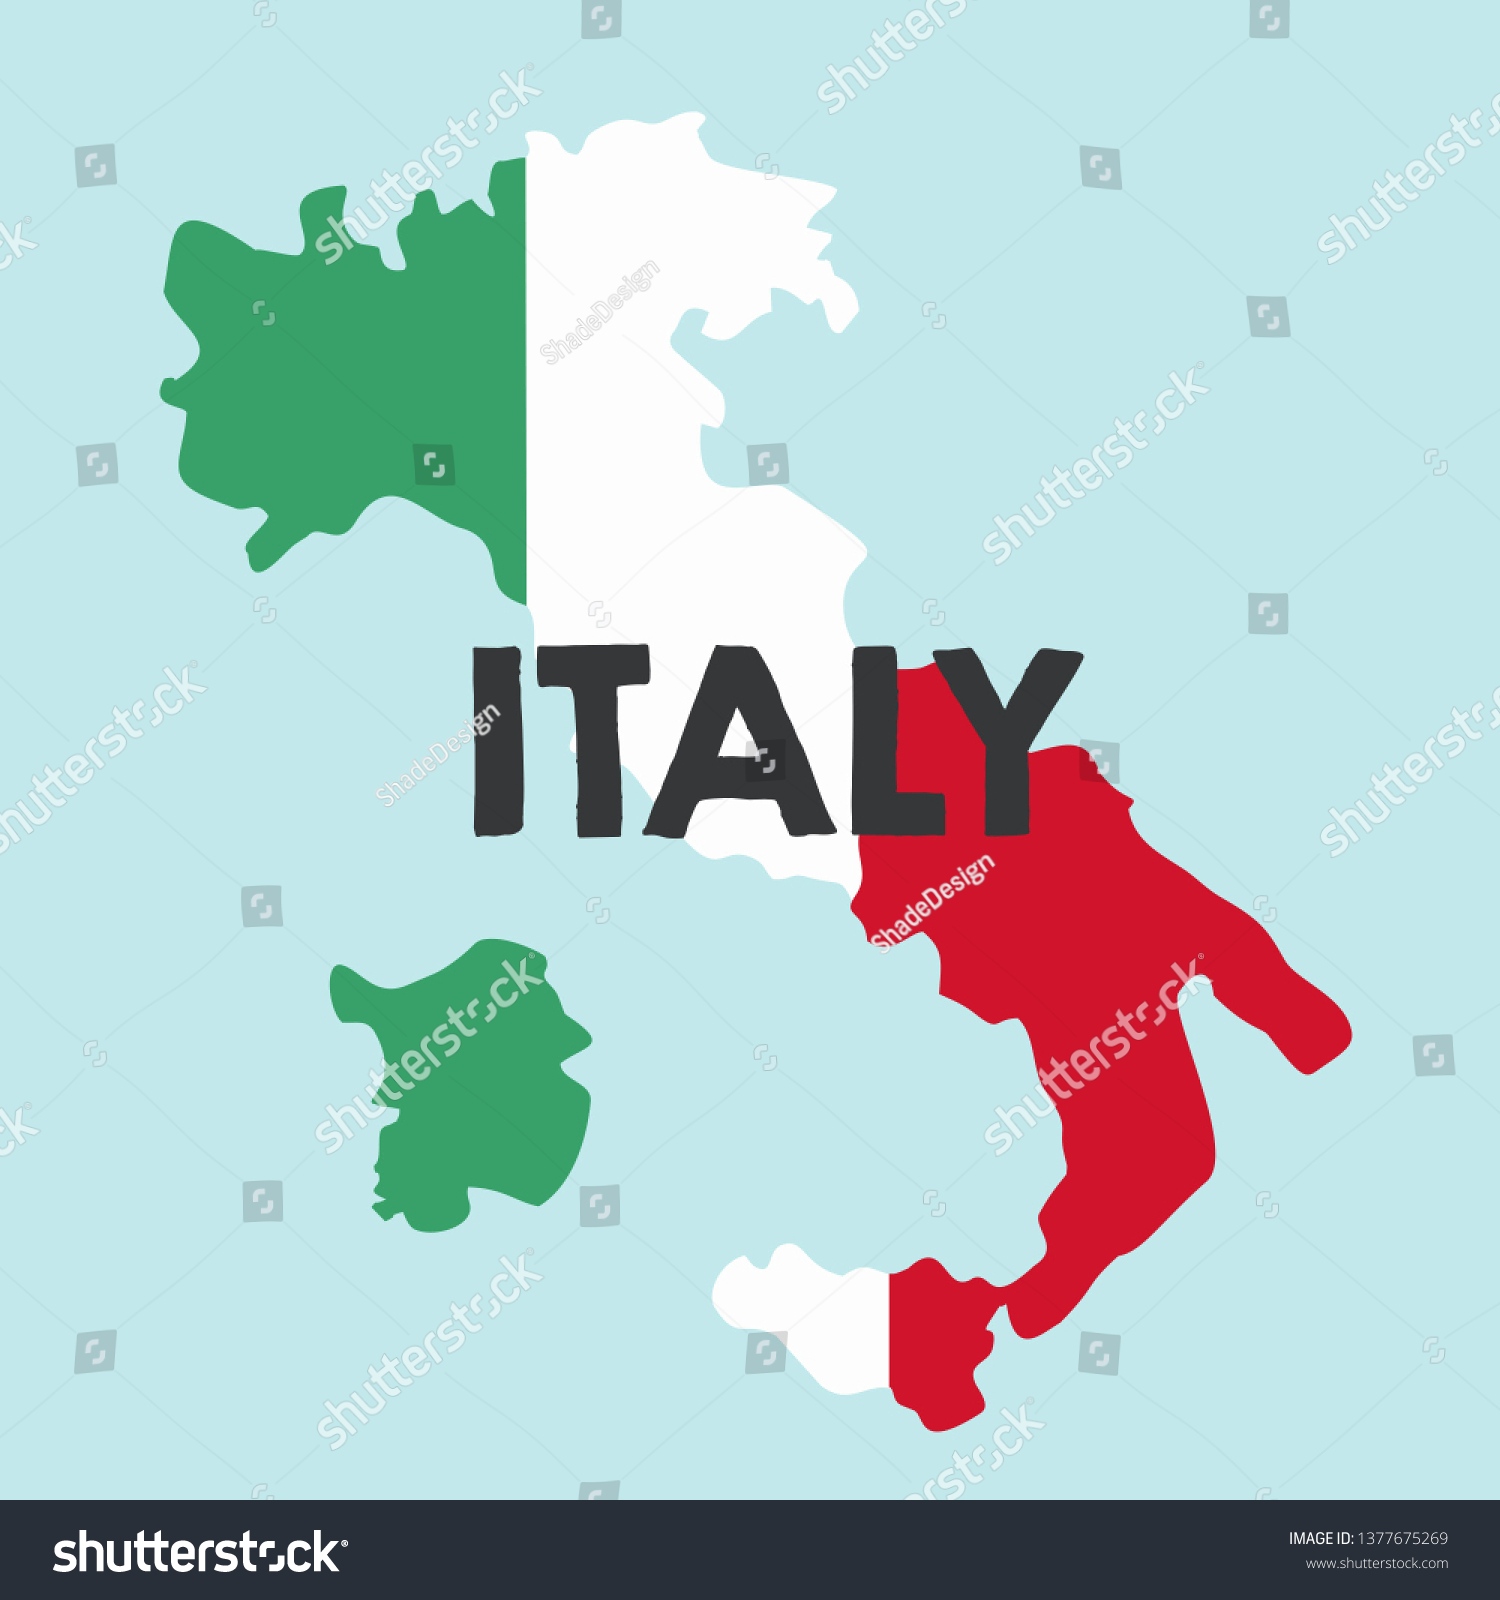 Vector icon map of Italy. Map of Italy in the color of the Italian flag. Illustration of a map of Italy in flat minimalism style and text: Italy. #1377675269